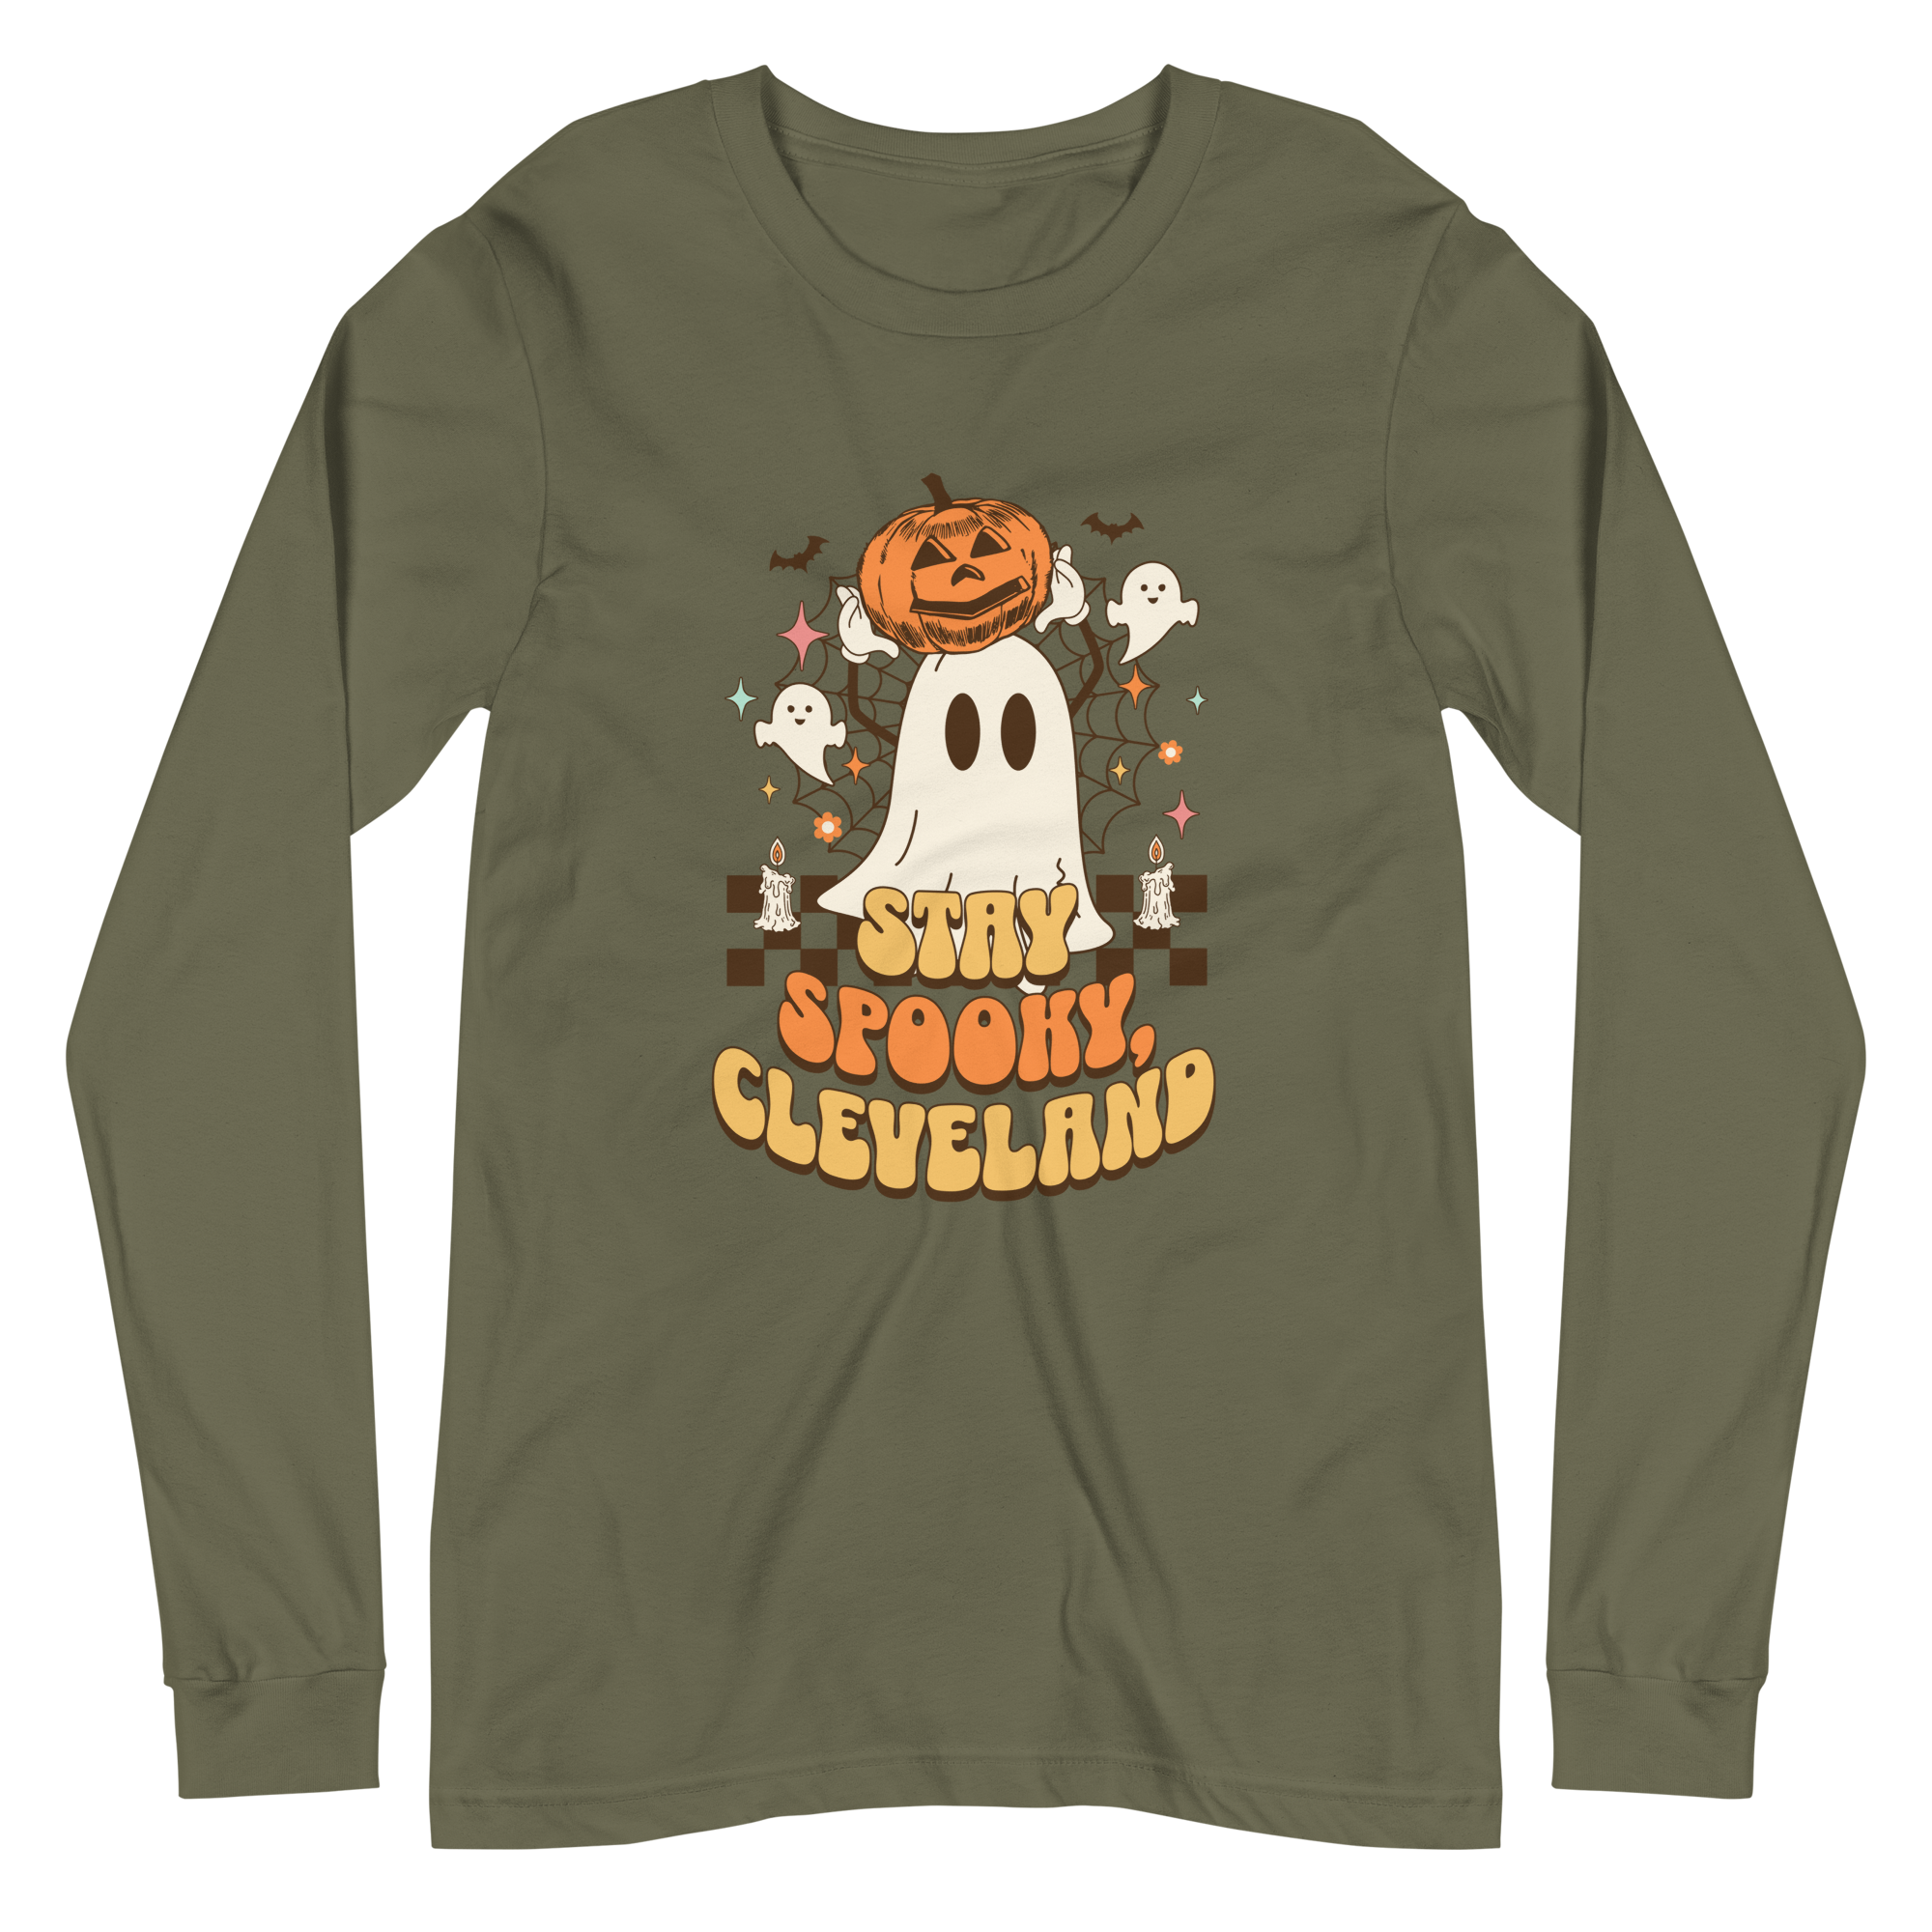 Stay Spooky, Cleveland Long-Sleeve T-Shirt